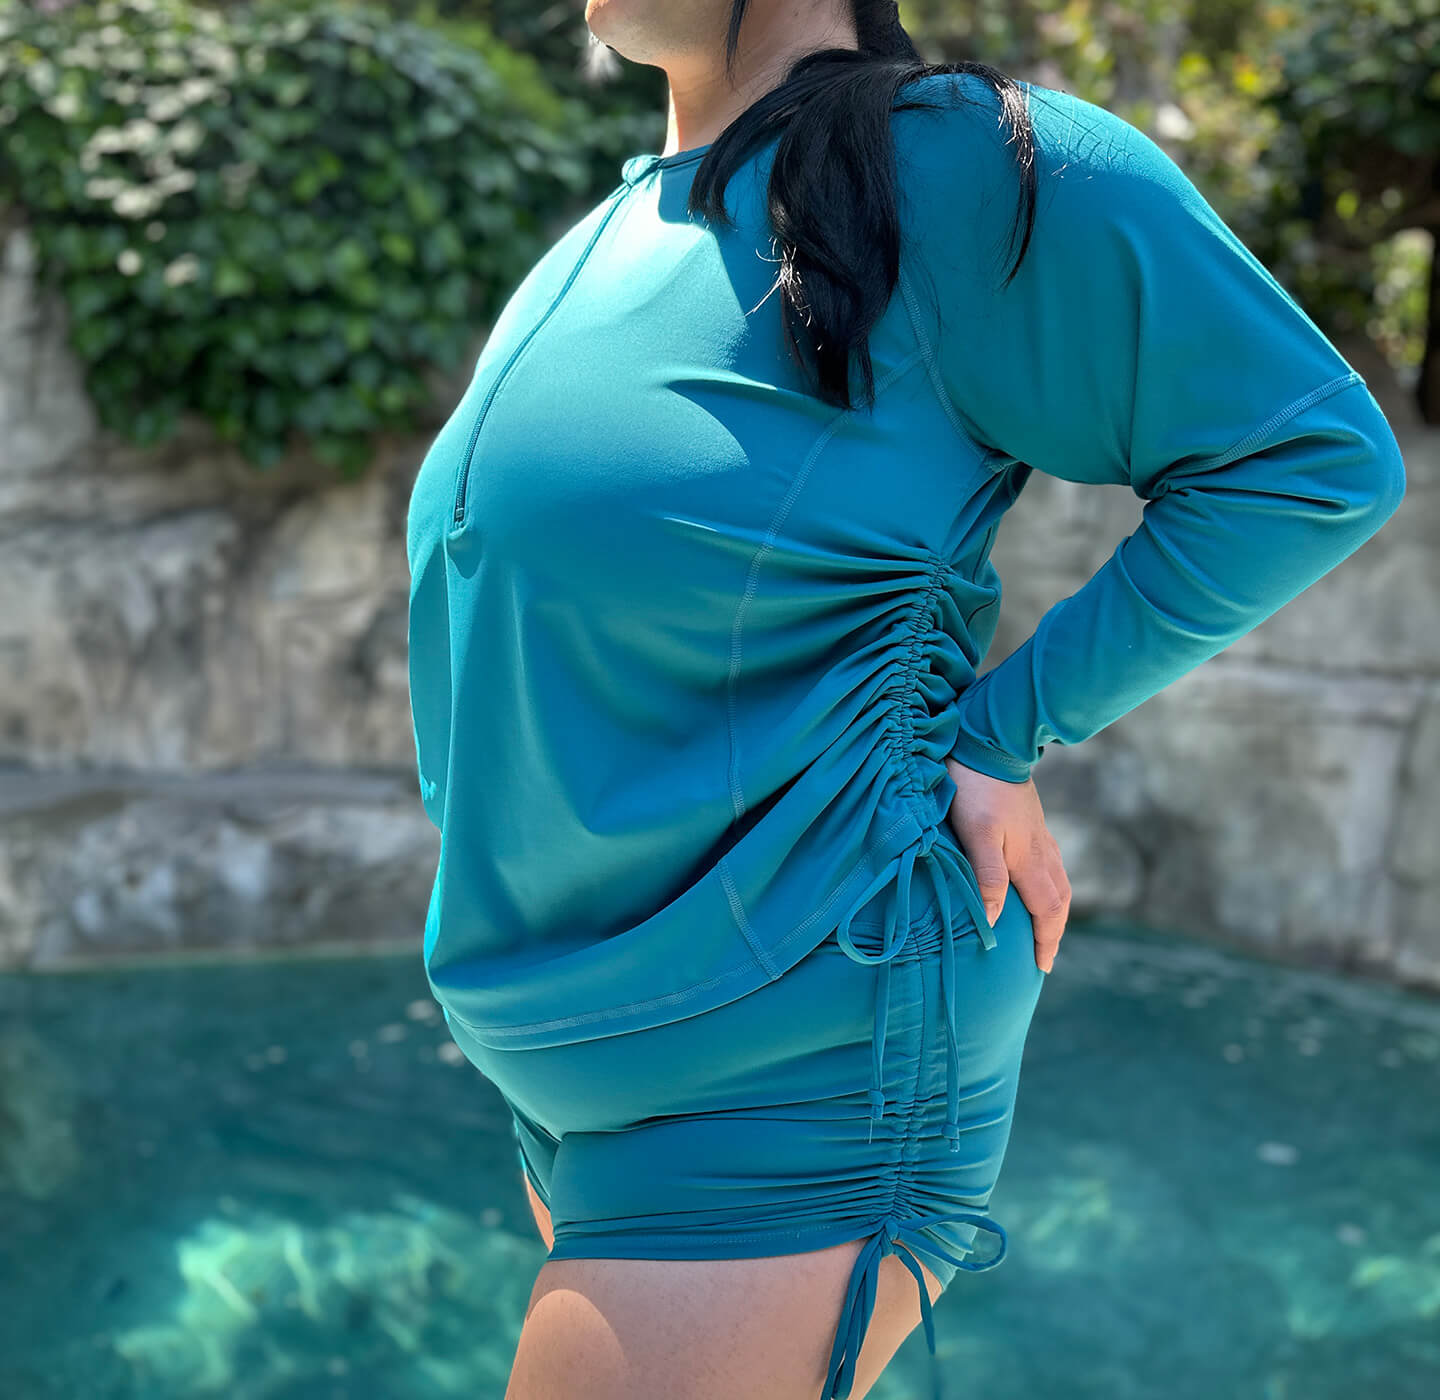 Plus size swim rash guard and booty shorts with matching side cinch detail